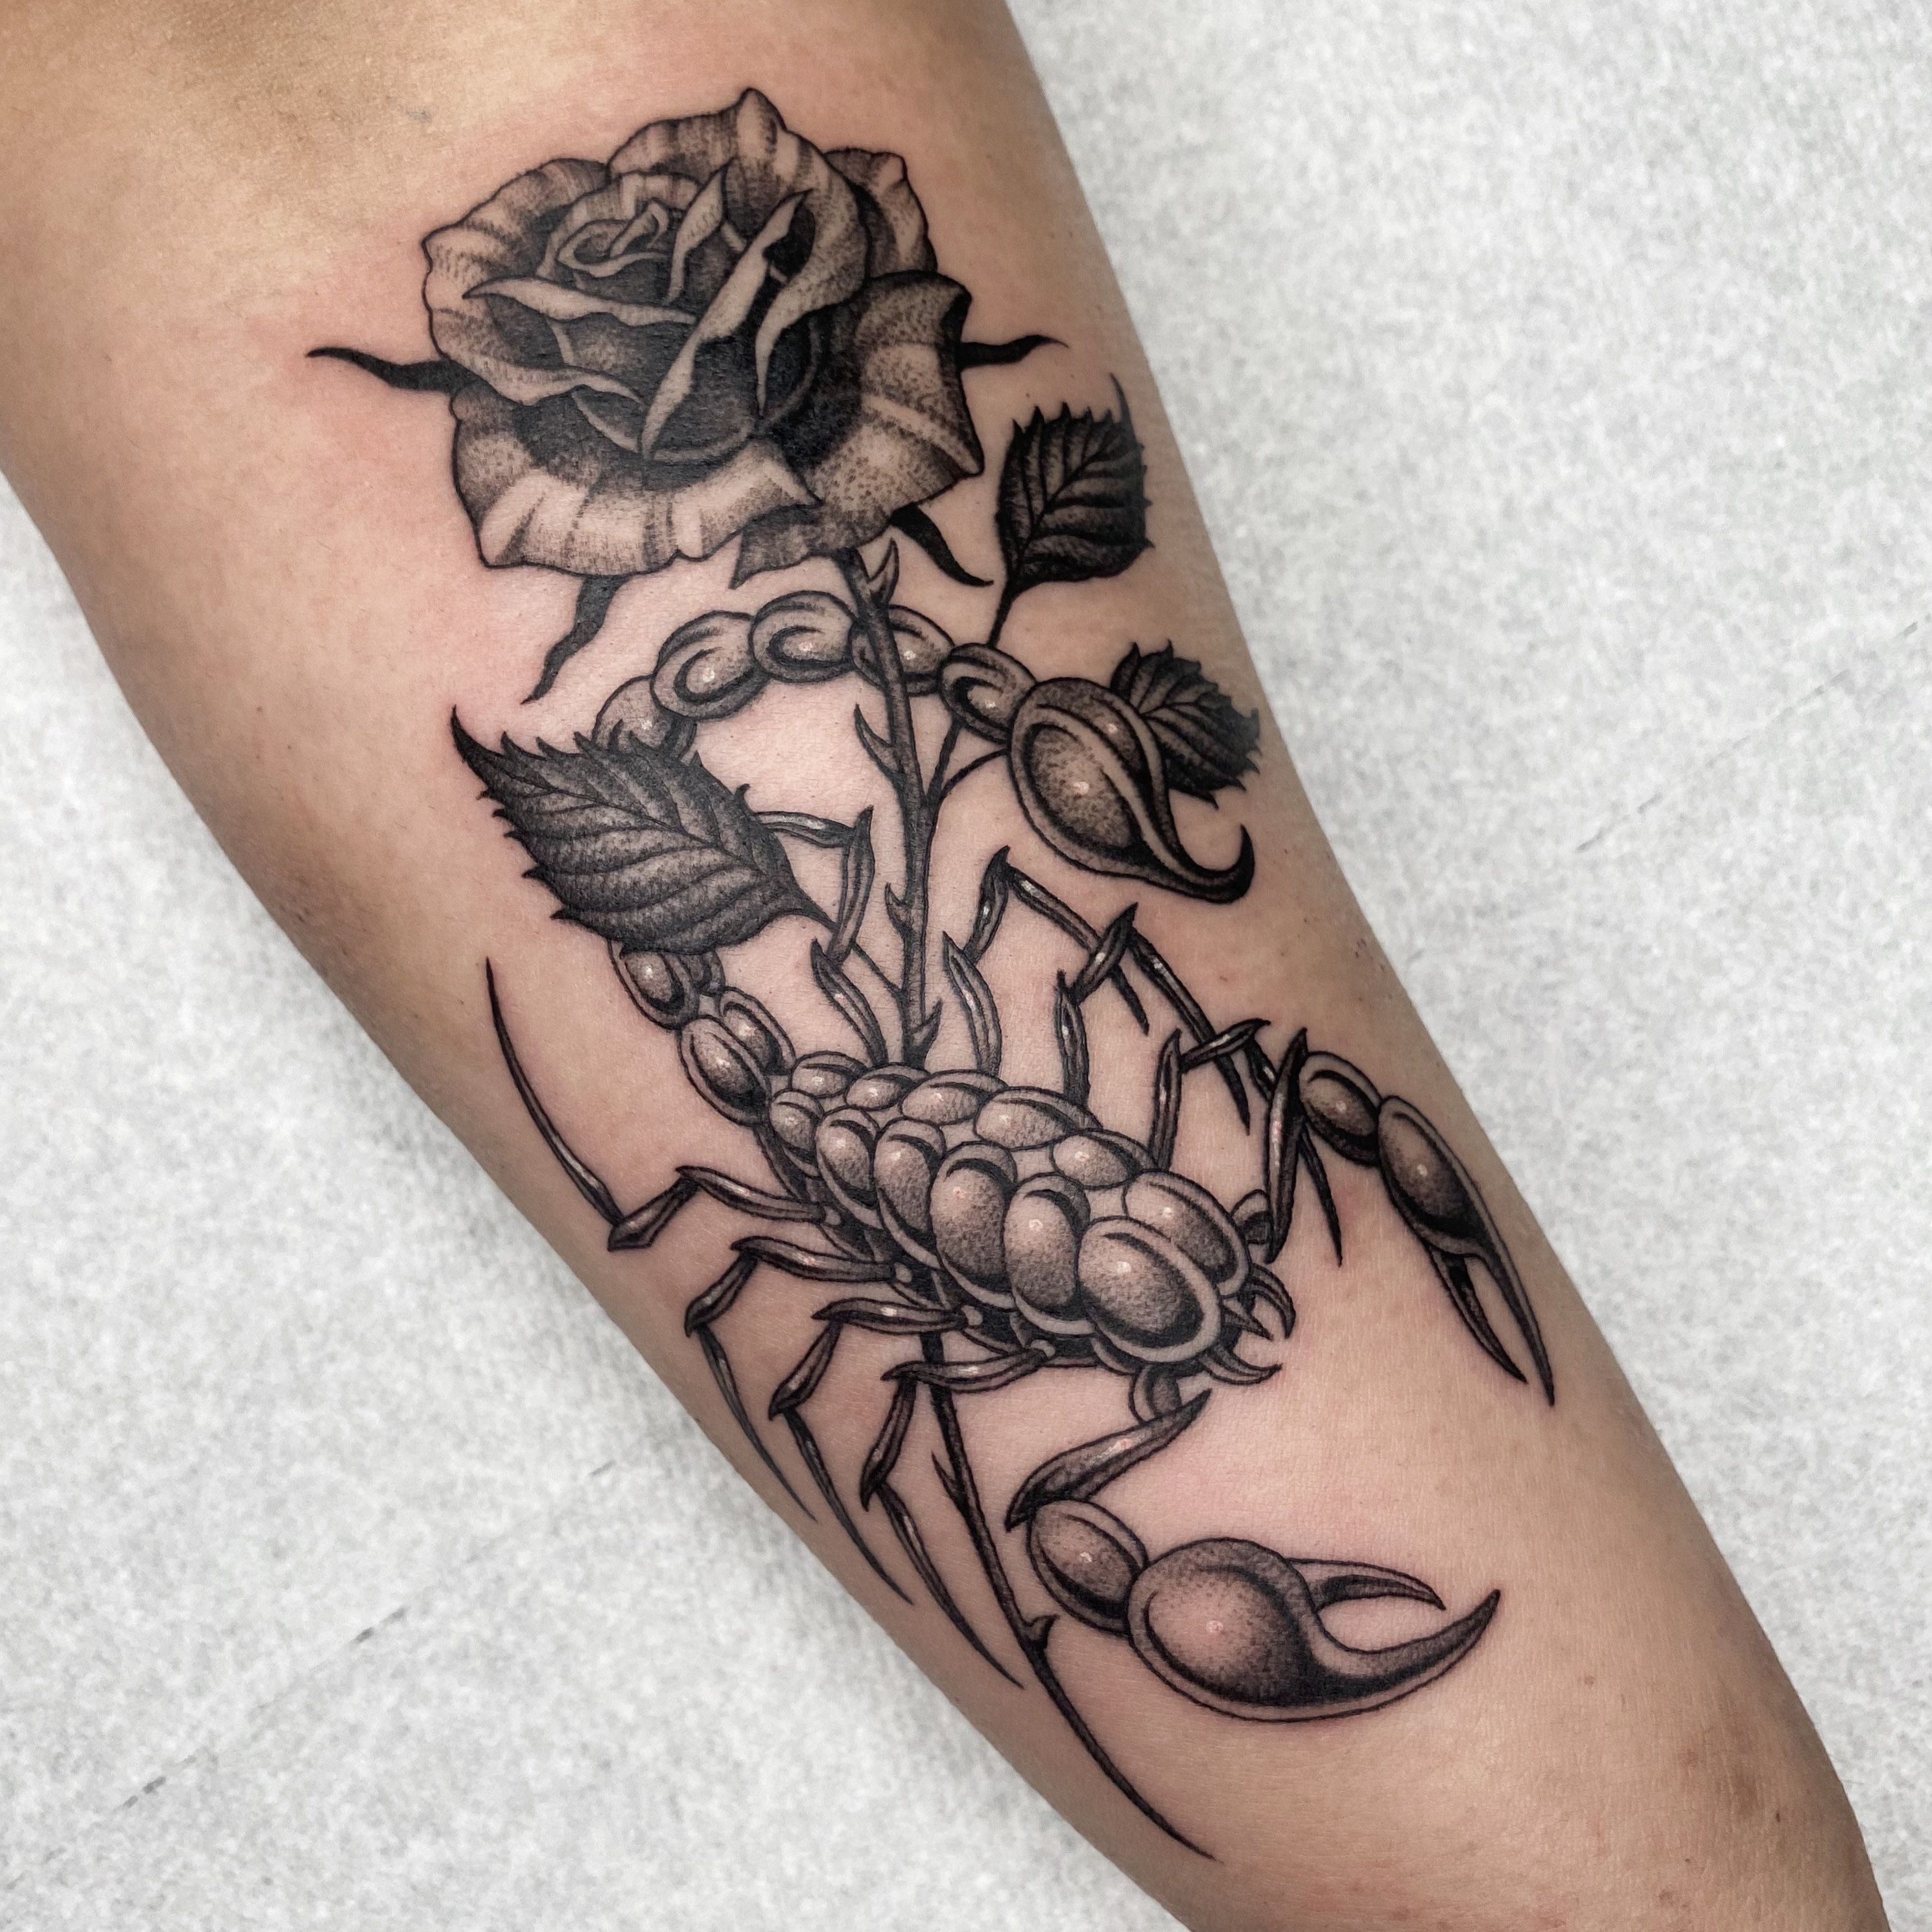 Traditional tattoo of a scorpion and rose on an arm By David Bruehl at  RedLetter1 in Tampa Florida  Scorpion tattoo Tattoos Traditional tattoo